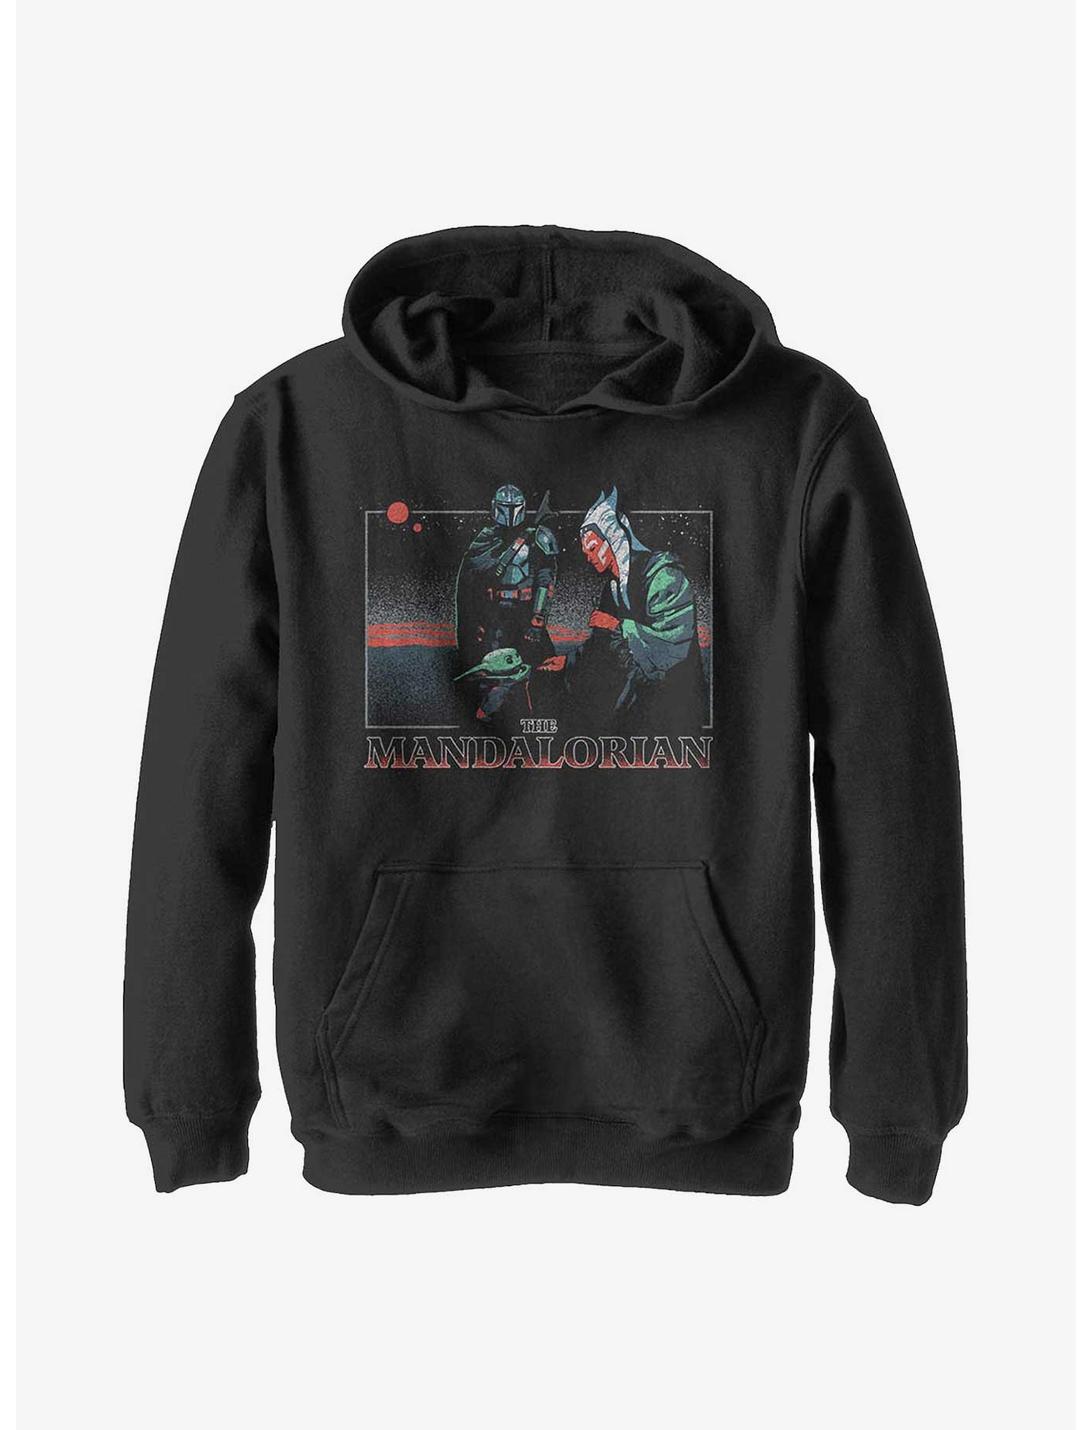 Star Wars The Mandalorian Is This The Way Youth Hoodie, BLACK, hi-res